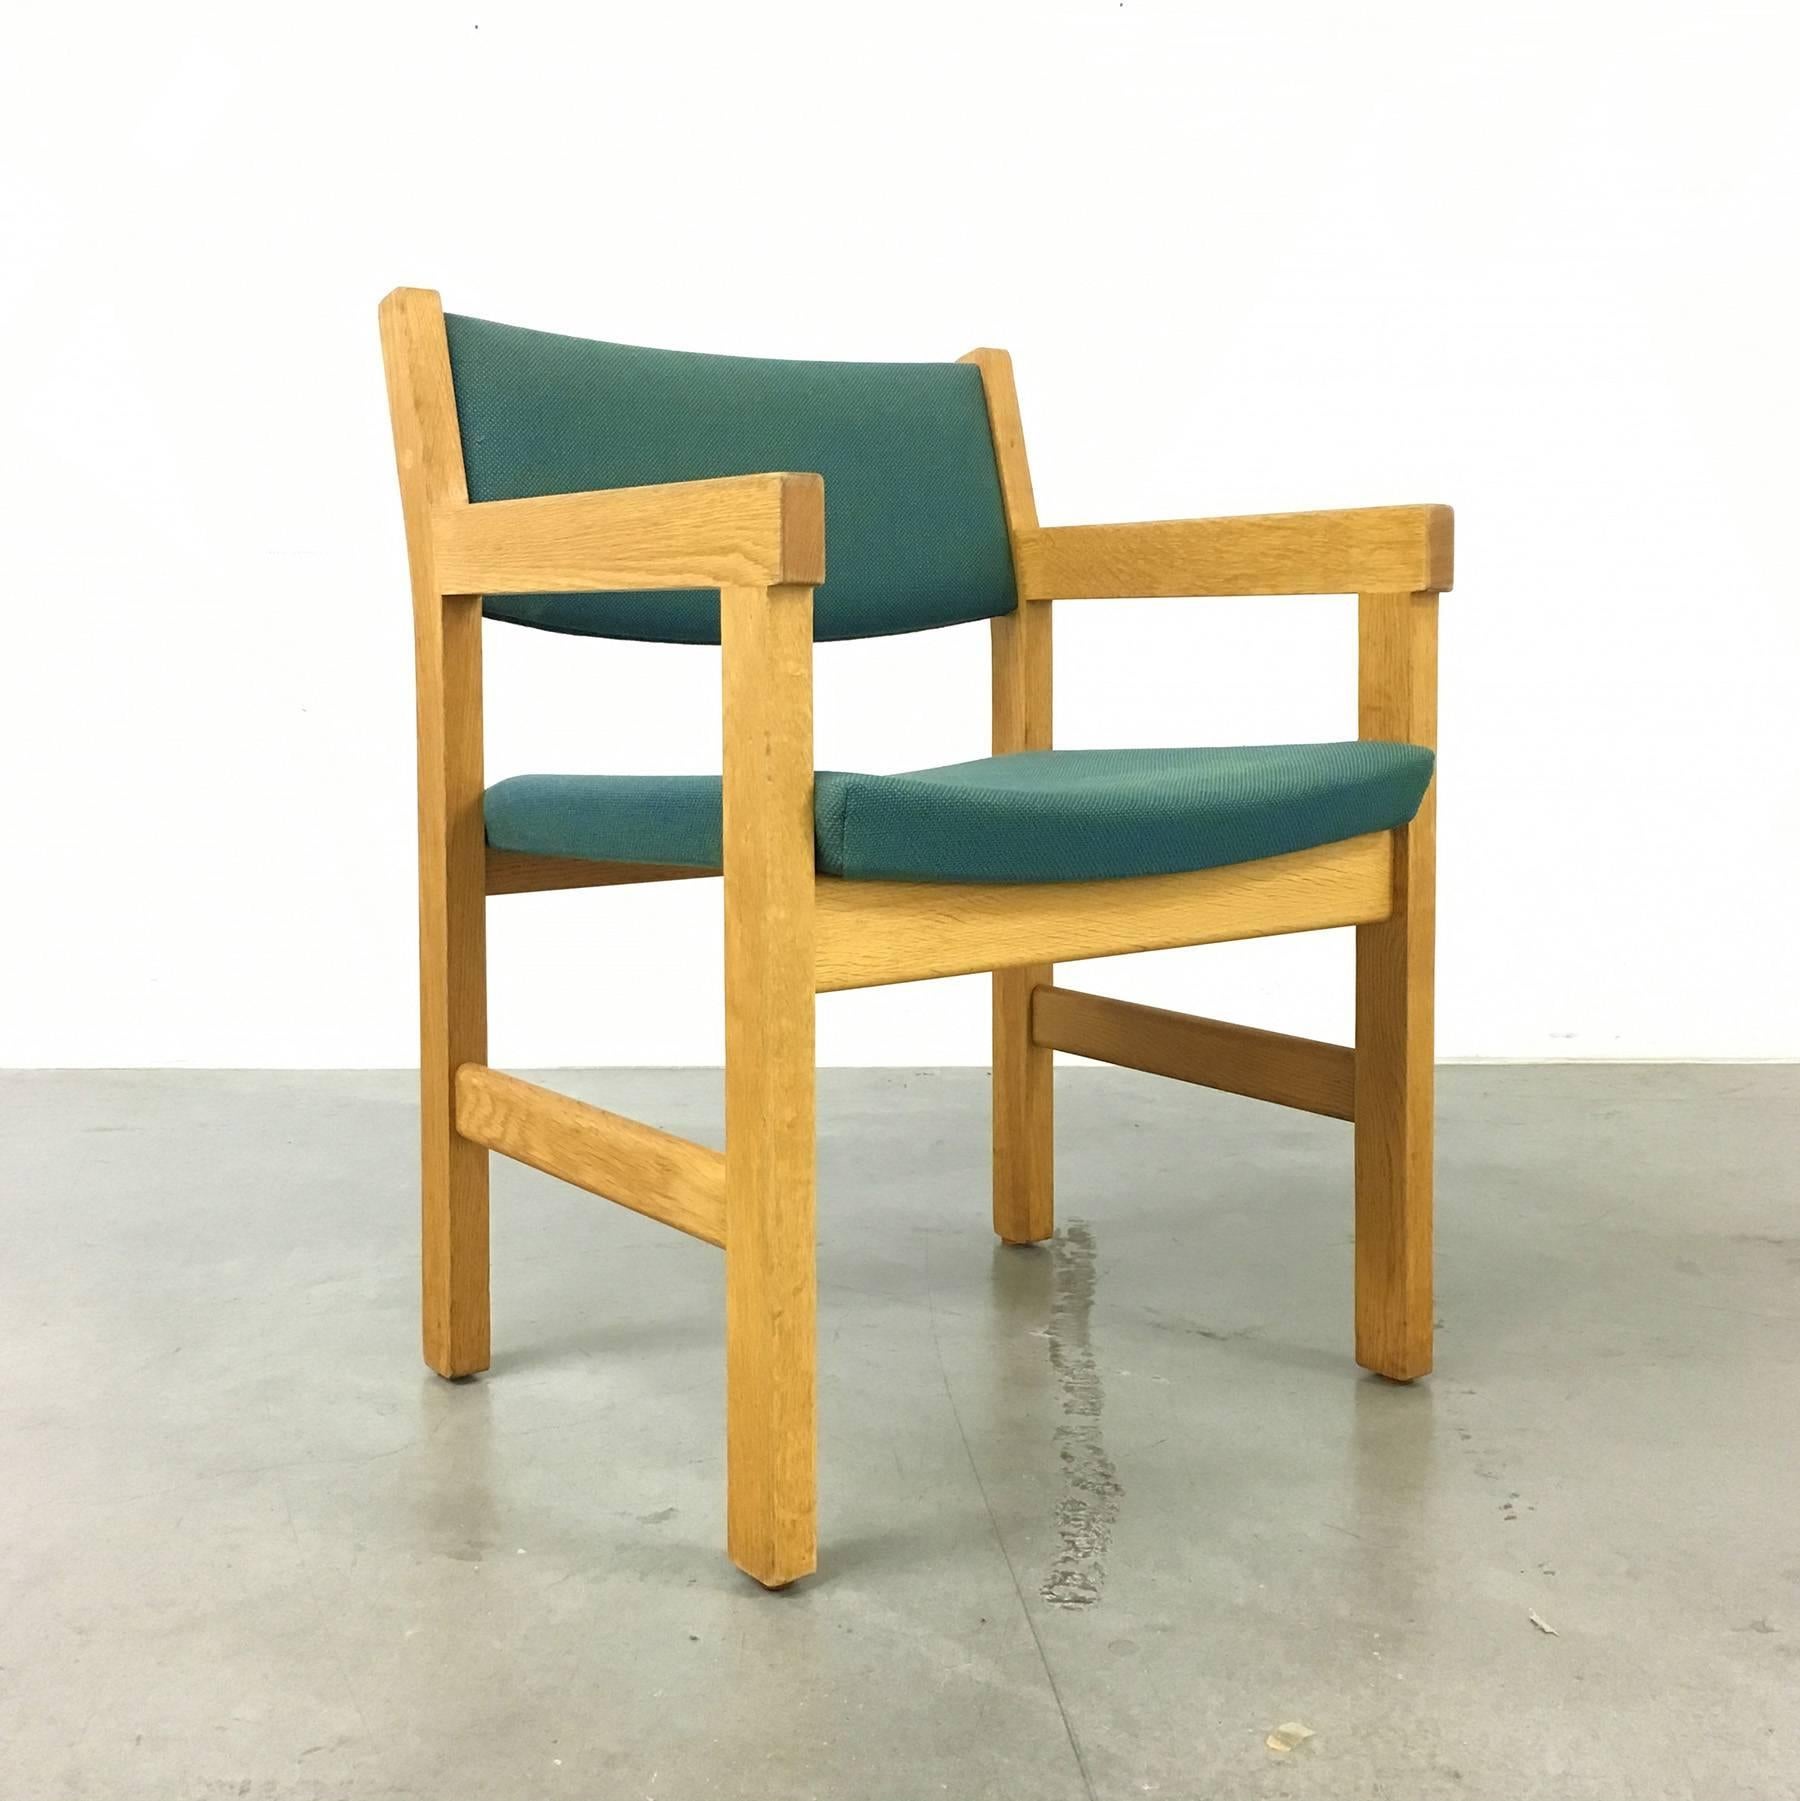 Two armchairs, designed around 1970 by Hans J. Wegner, manufactured in Denmark by GETAMA.